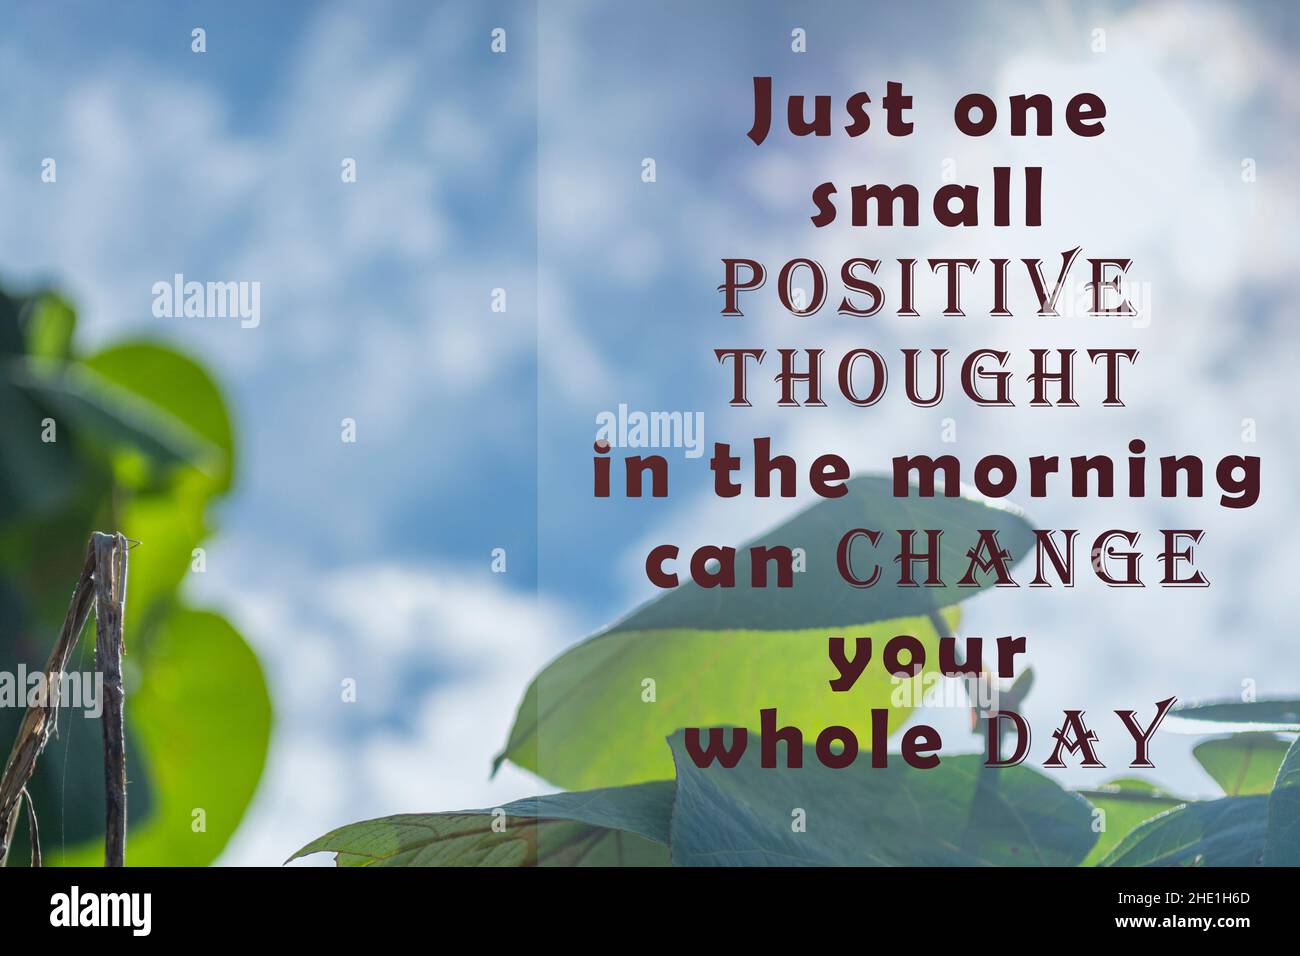 Motivational and inspirational quote - Just one small positive thought in  the morning can change your whole day. On blurred background of bright blue  Stock Photo - Alamy